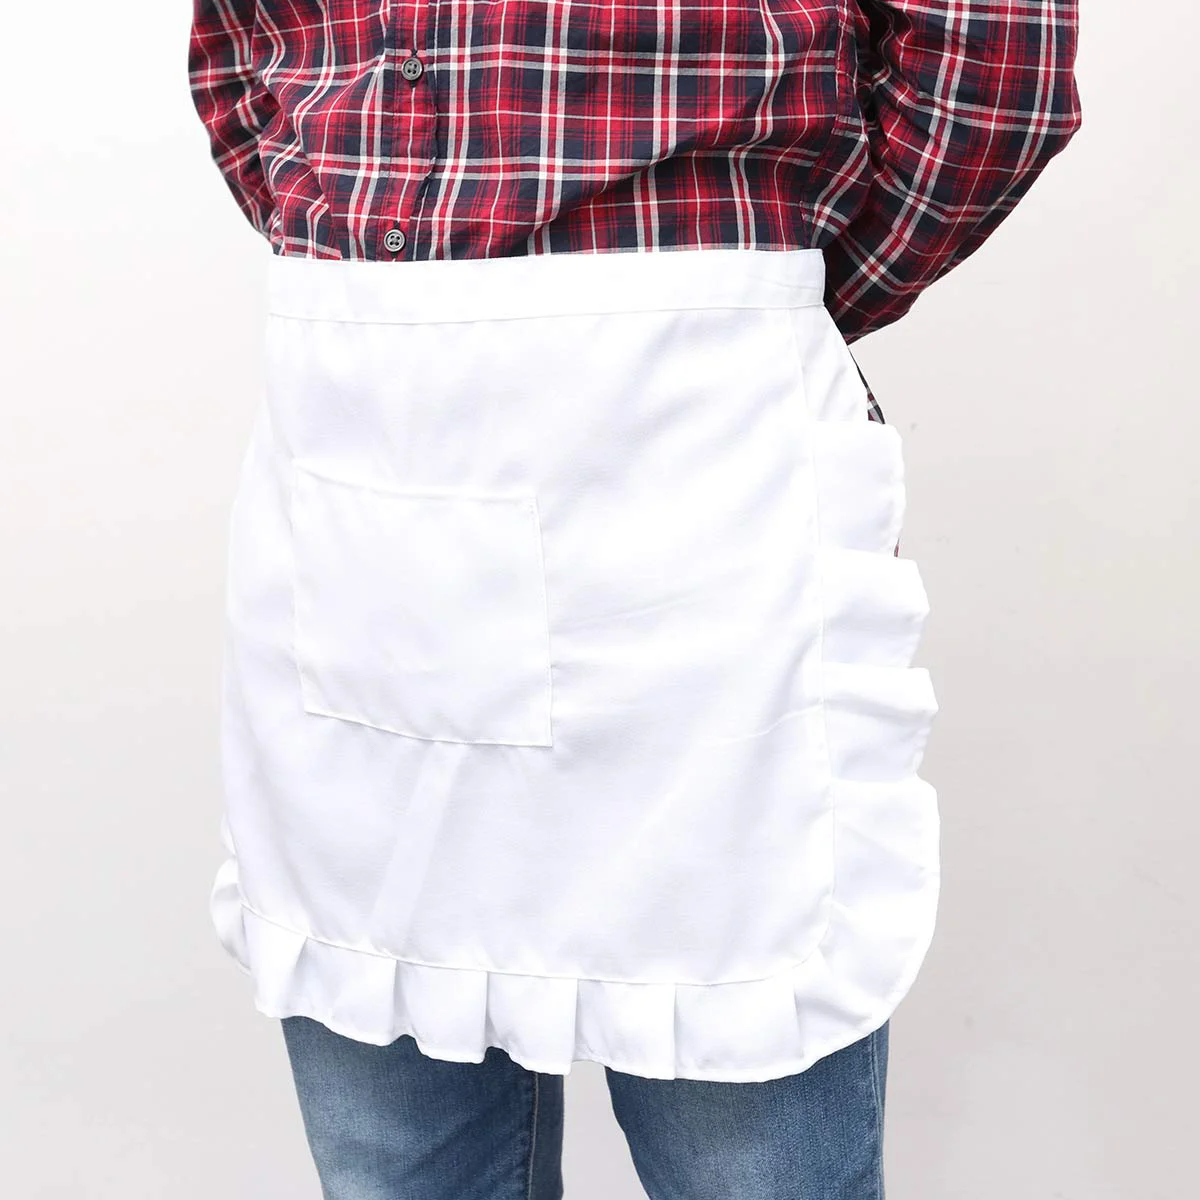 

Waist Apron Maid Costume with Pocket Floral Cook Apron Kitchen Party Favors for Waitress ( White ) Aprons women